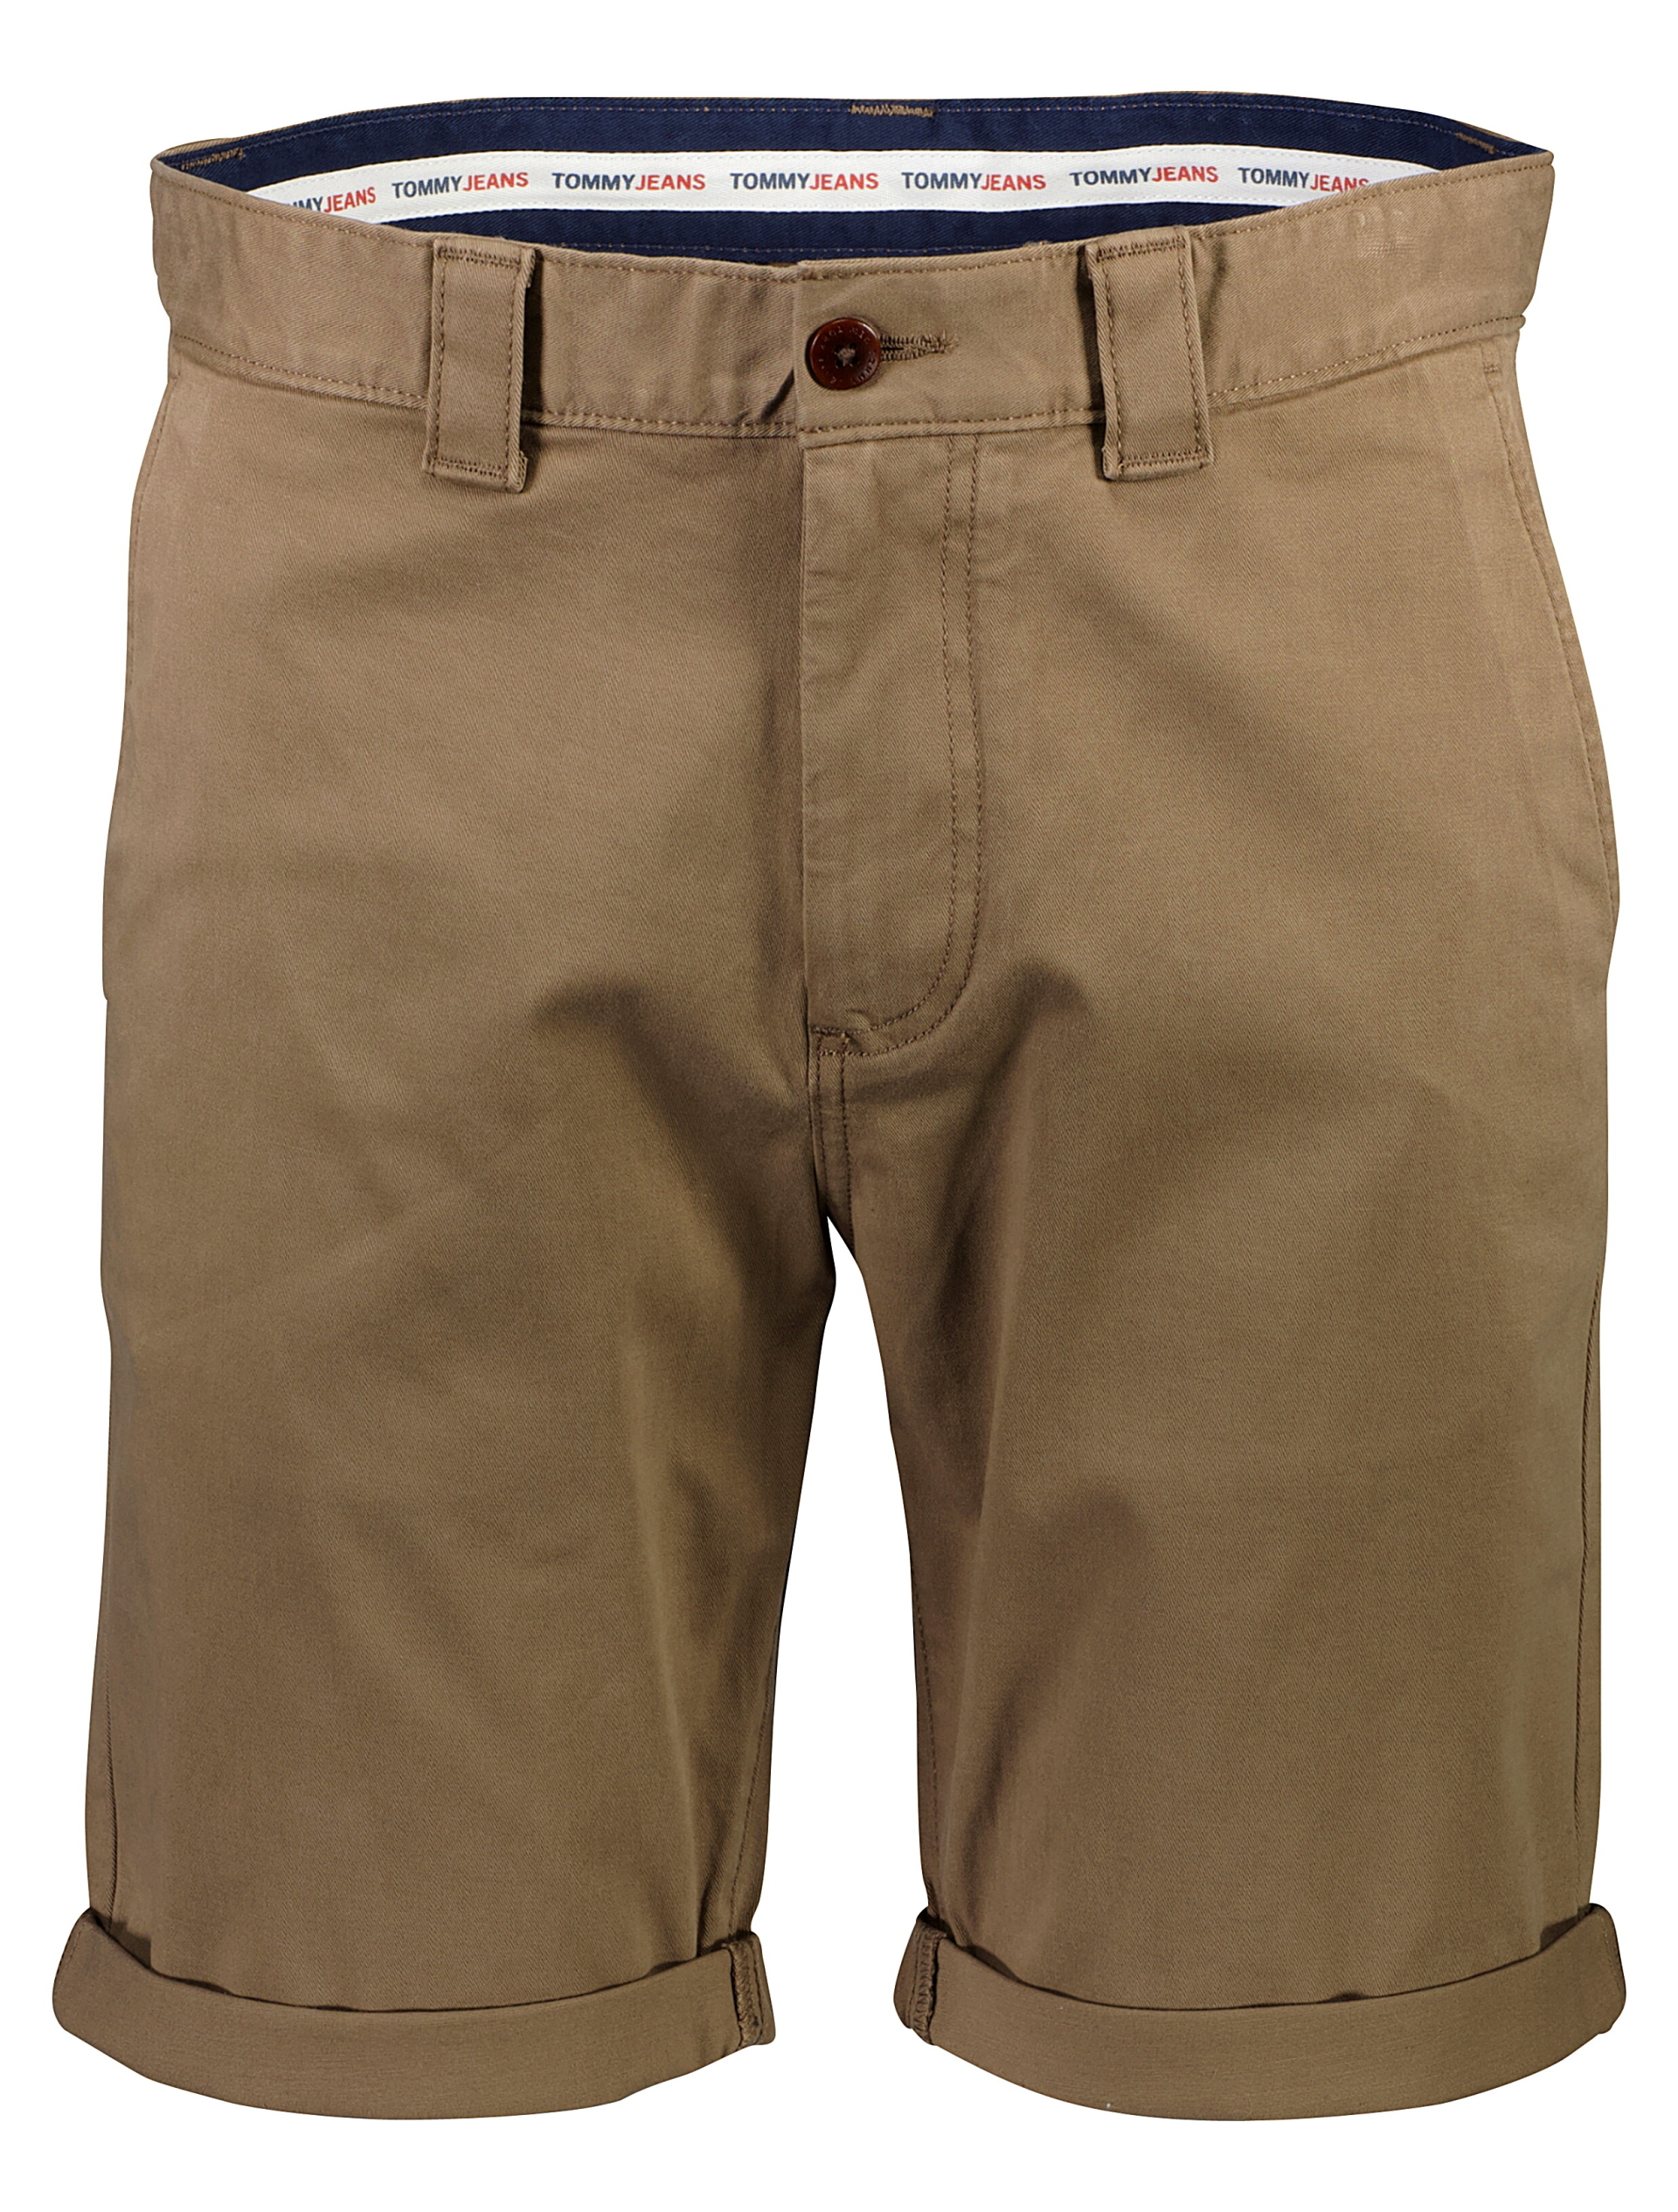 Tommy Jeans Chino shorts brun / pko brown